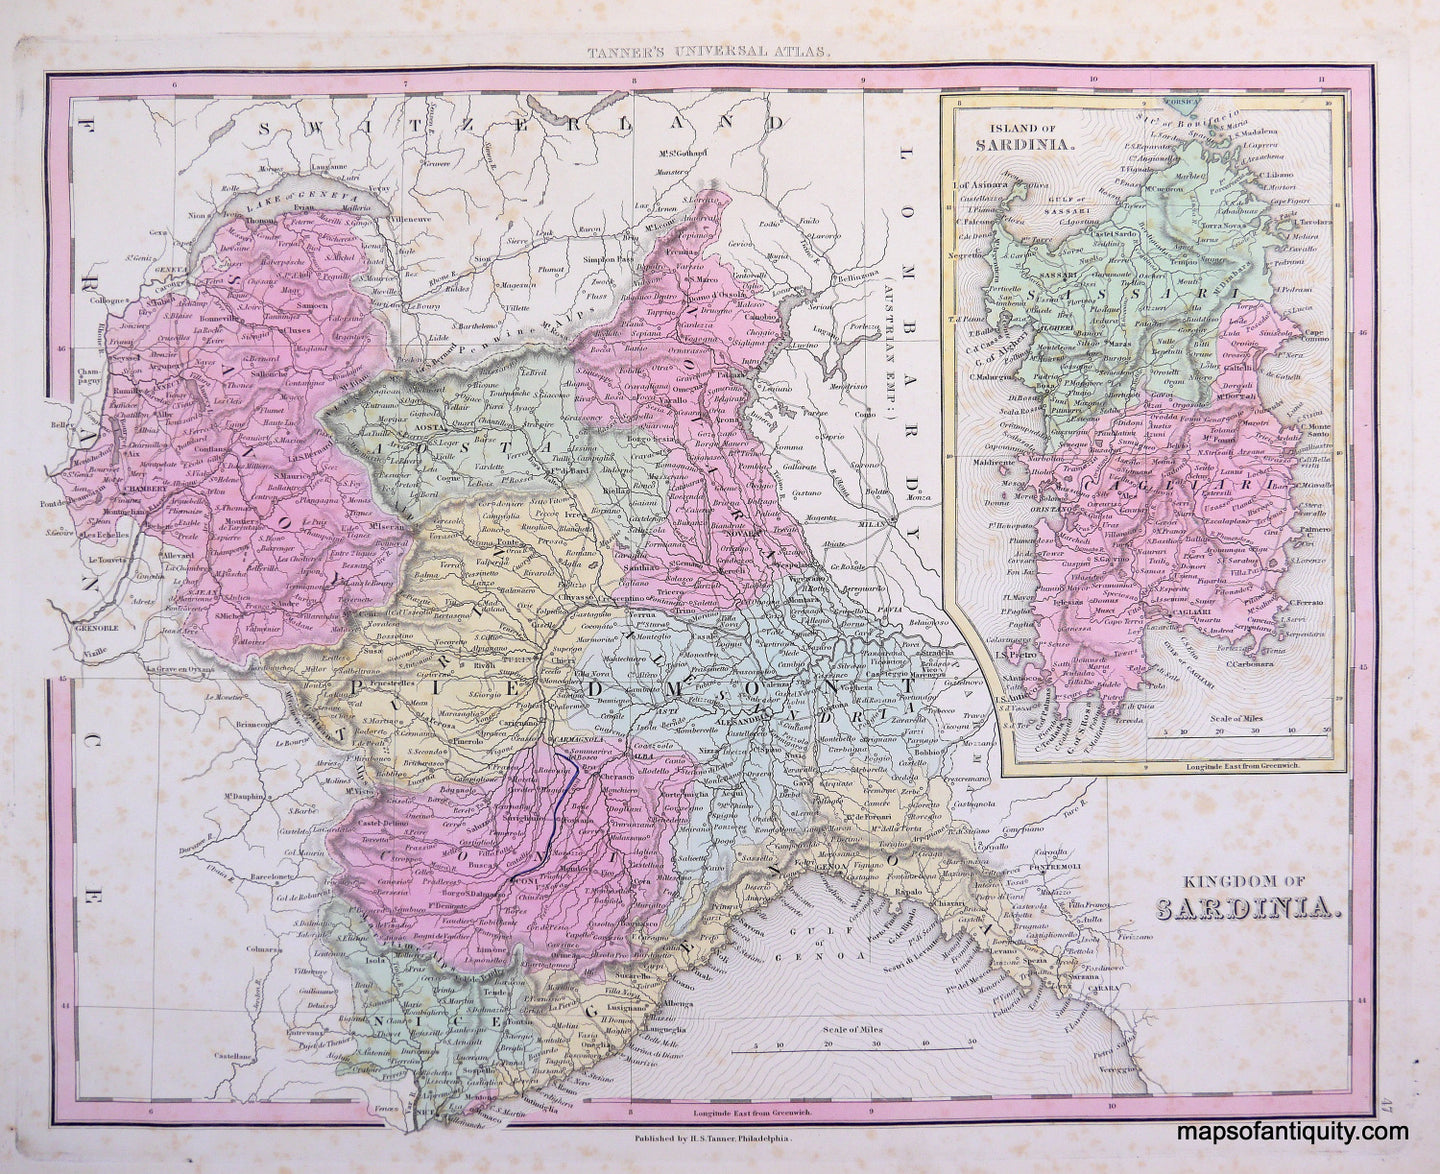 Antique-Hand-Colored-Engraved-Map-Kingdom-of-Sardinia.-Europe-Italy-c.-1840-Tanner-Maps-Of-Antiquity